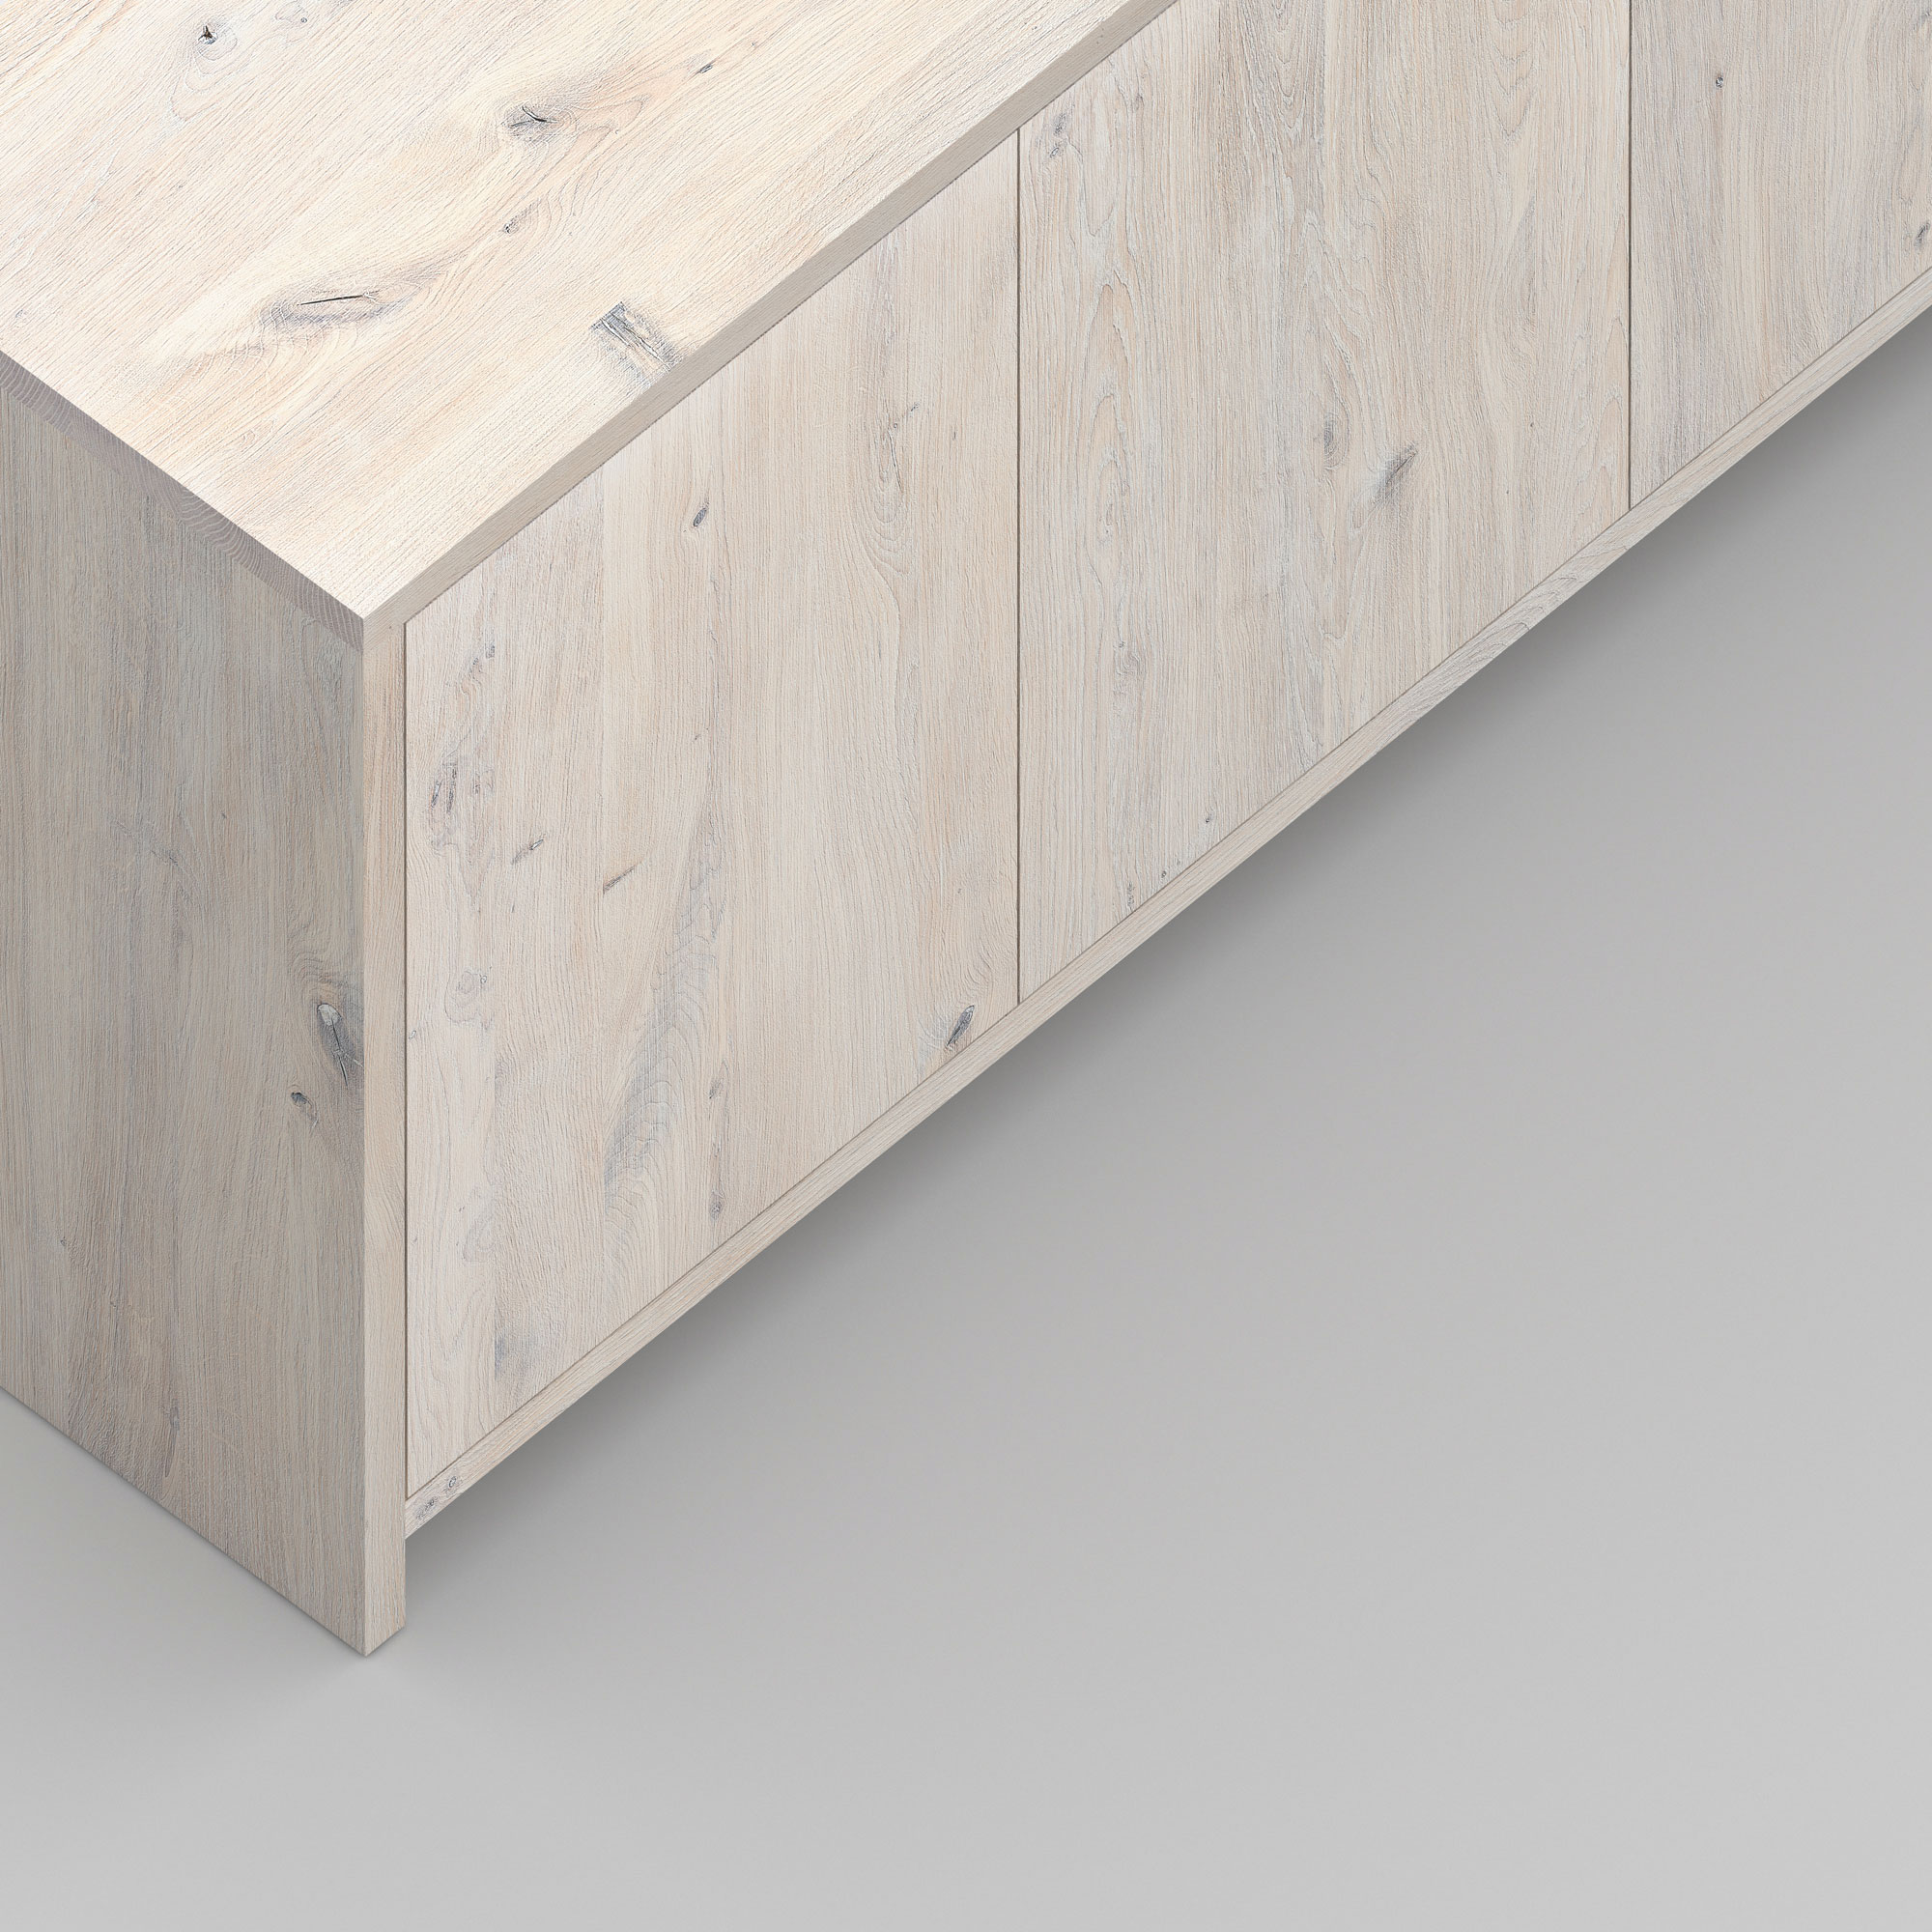 Tailor-Made Sideboard MENA F cam3 custom made in solid wood by vitamin design